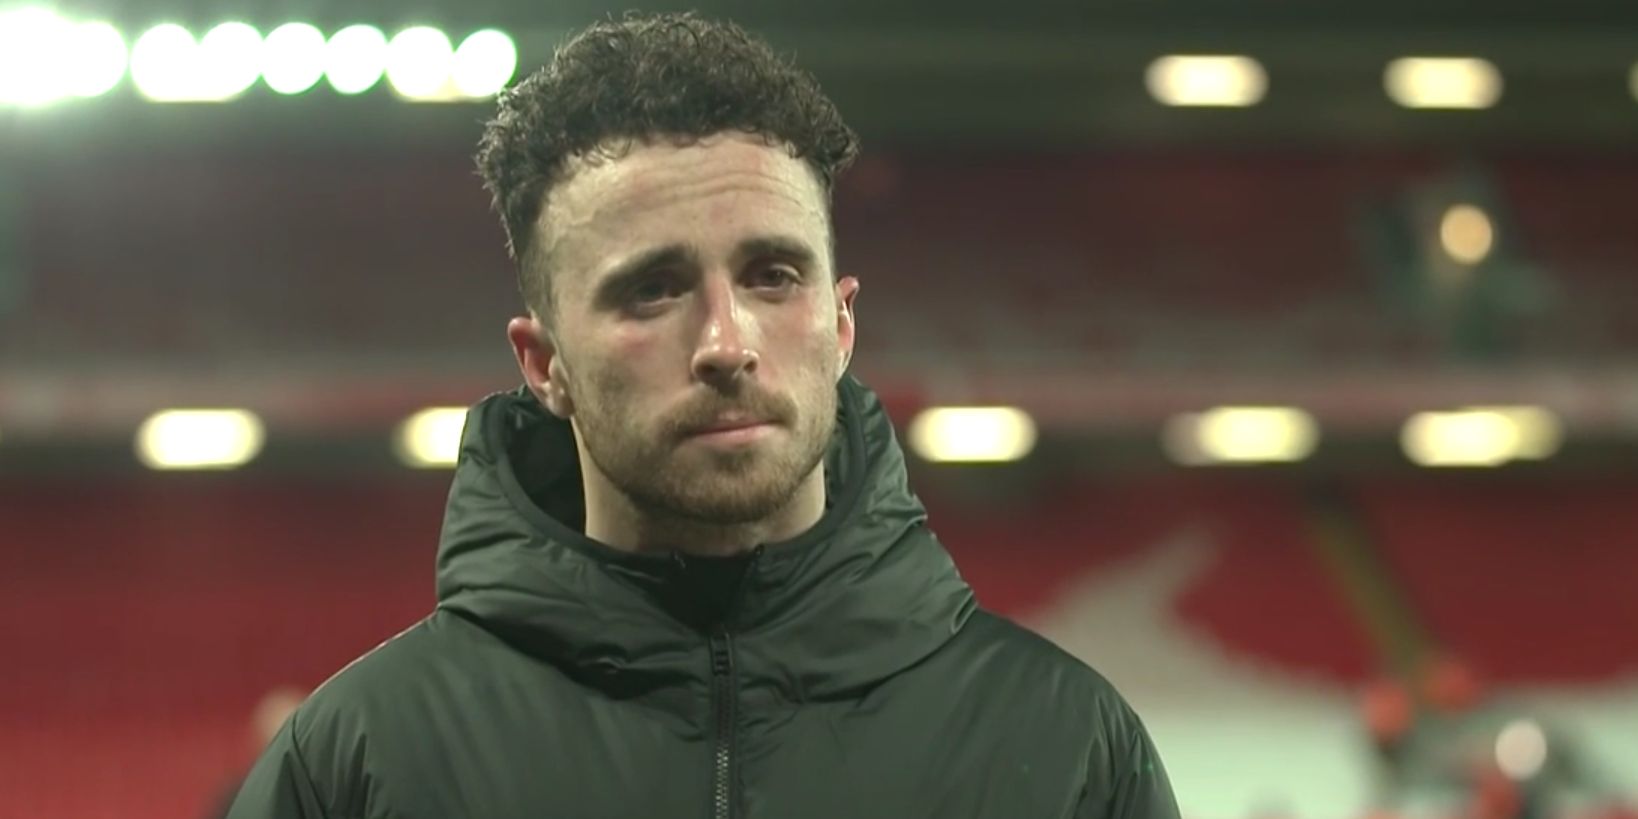 (Video) “You don’t save those” – Diogo Jota full of adulation for Trent Alexander-Arnold following his brilliant Newcastle goal